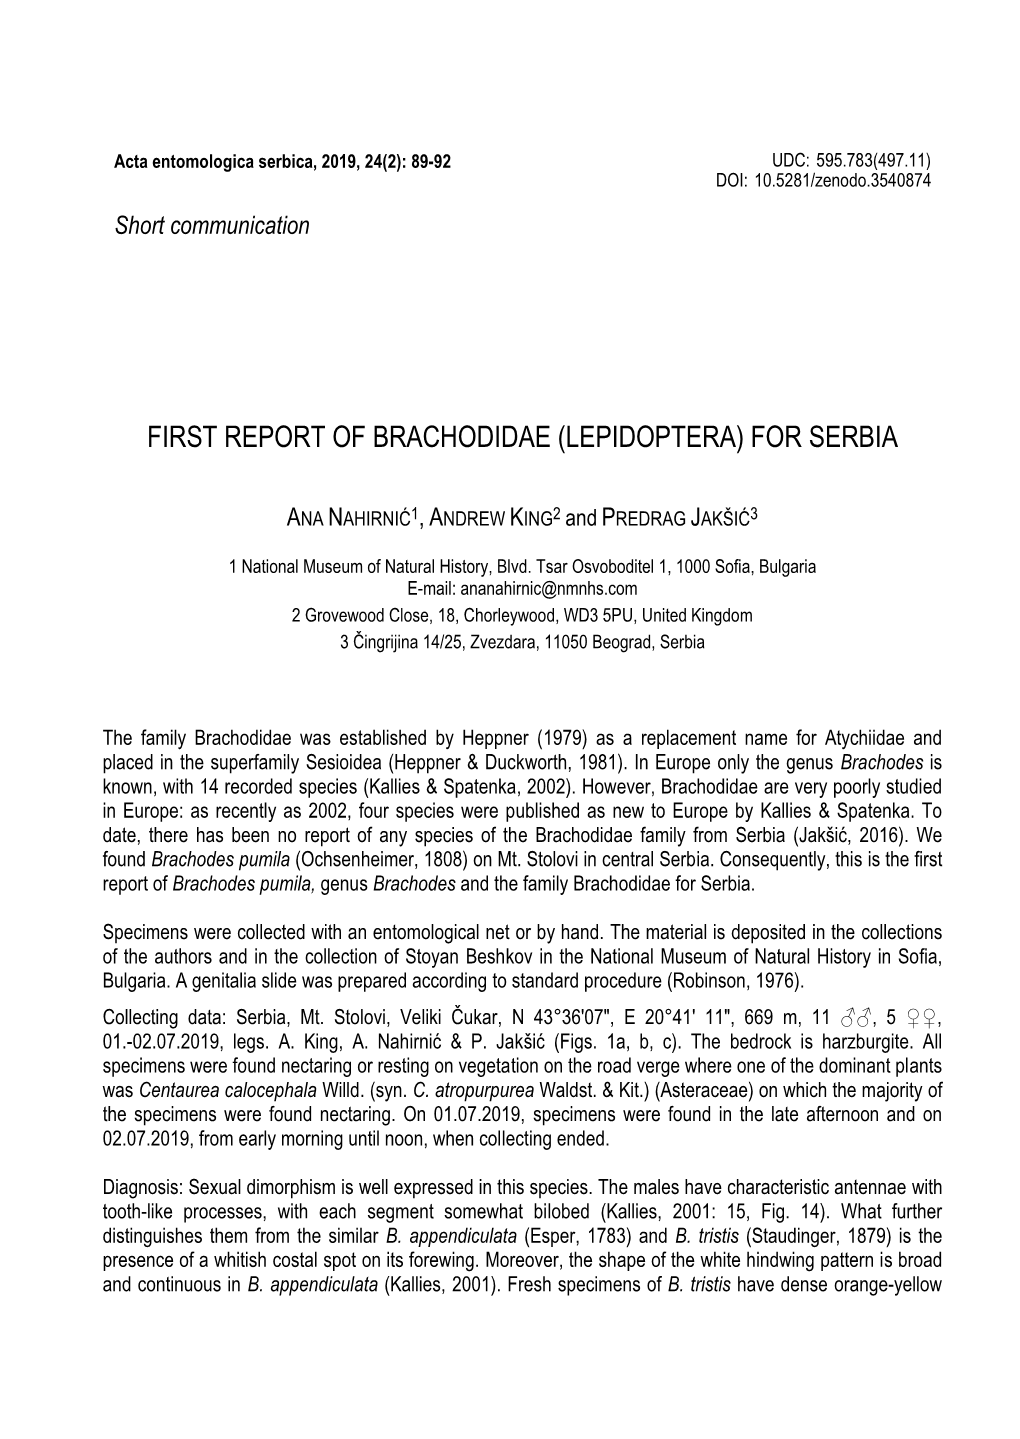 First Report of Brachodidae (Lepidoptera) for Serbia